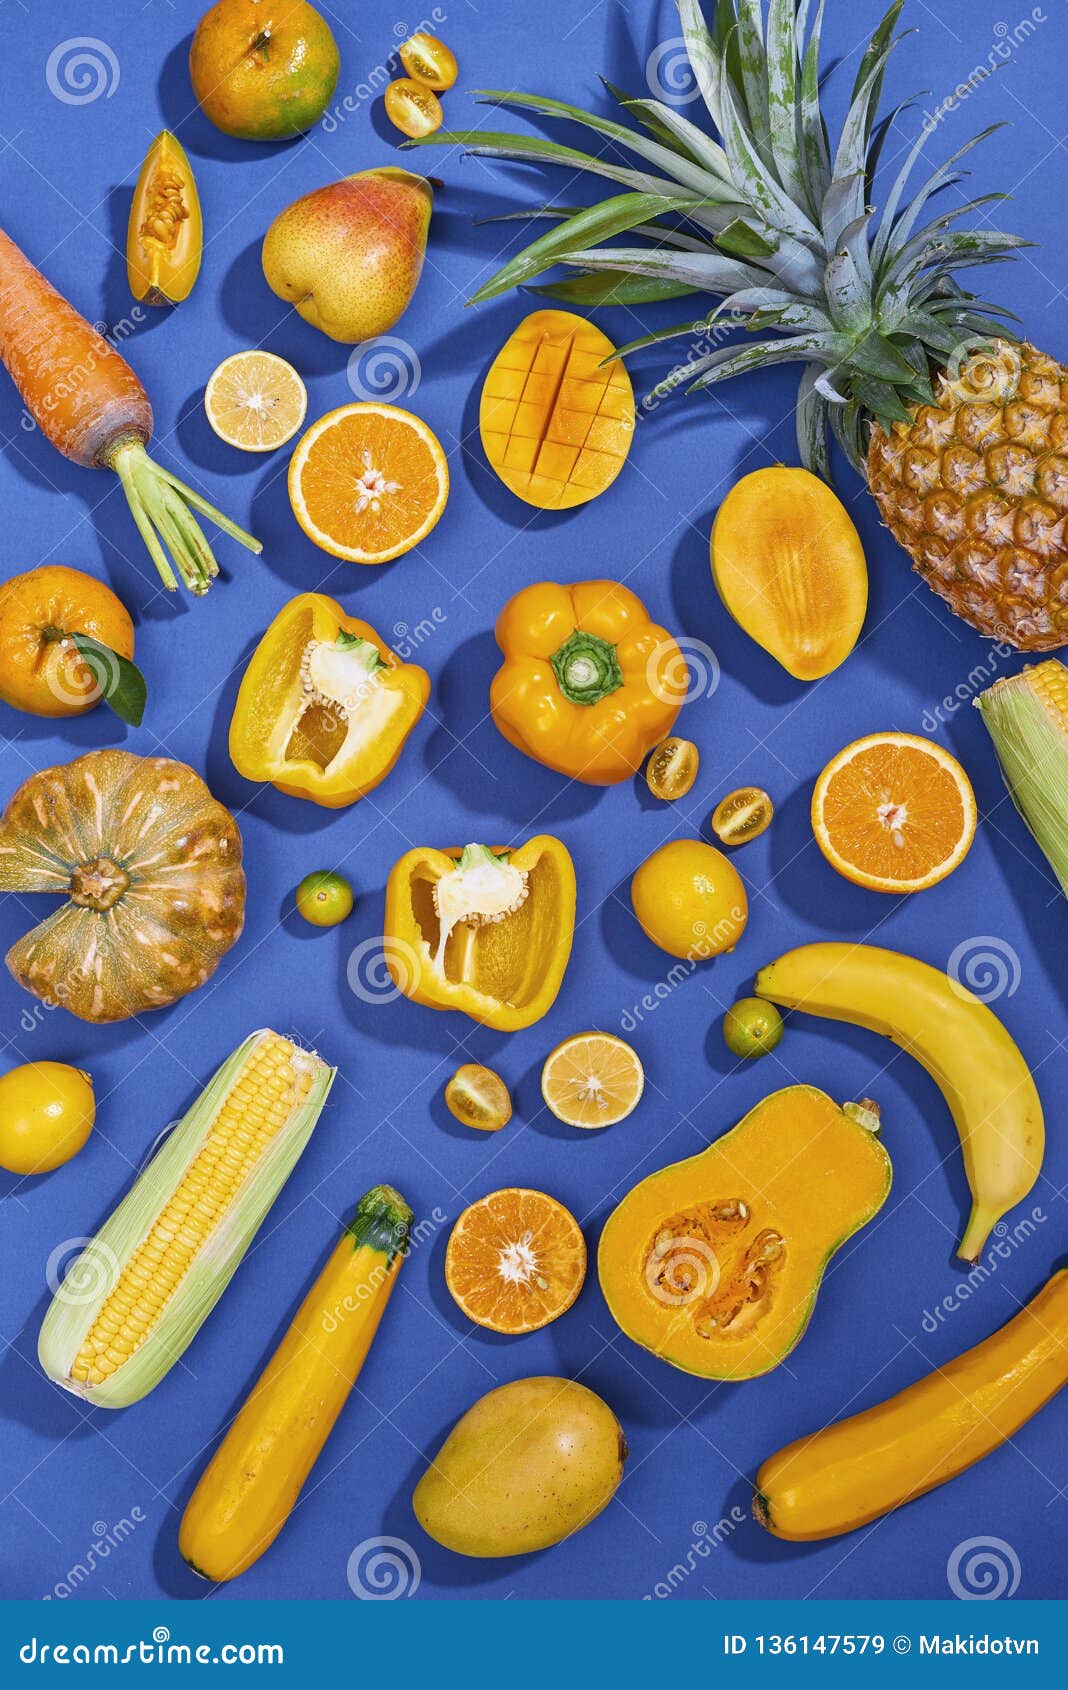 Collection Of Fresh Yellow Fruit And Vegetables On The Blue Background ...